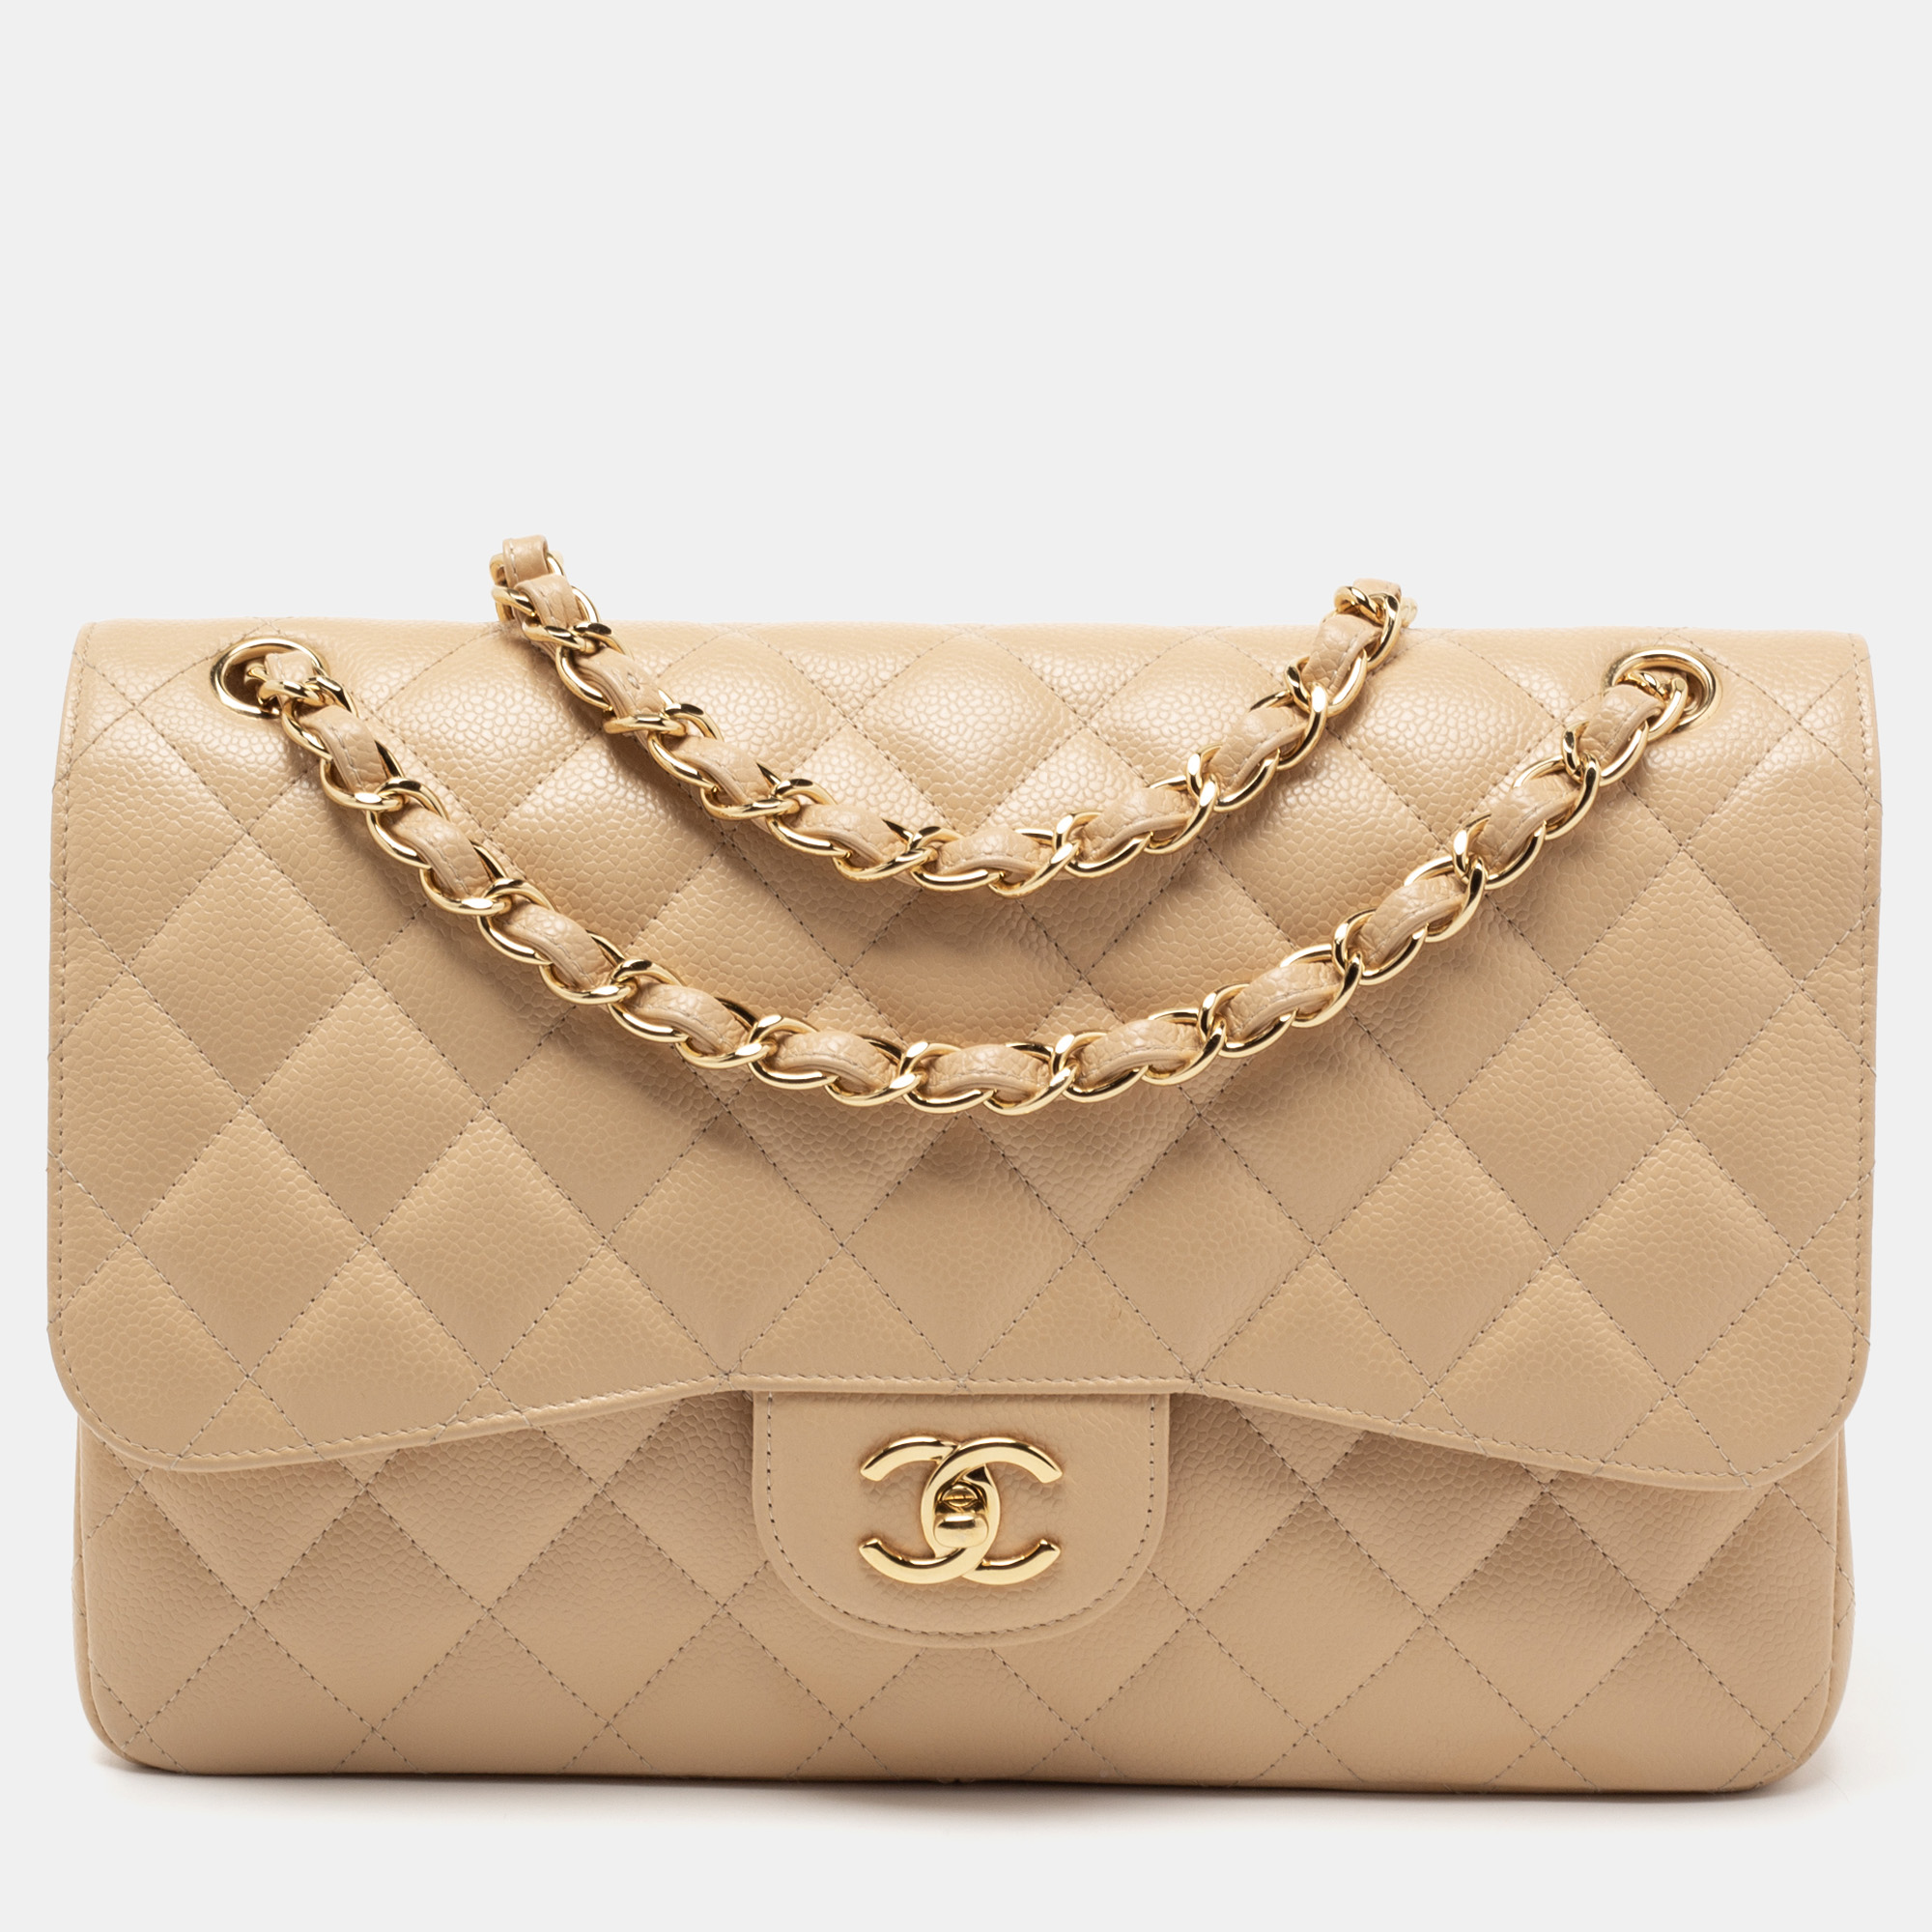 Buy Chanel Bags, Shoes & Watches | The Luxury Closet